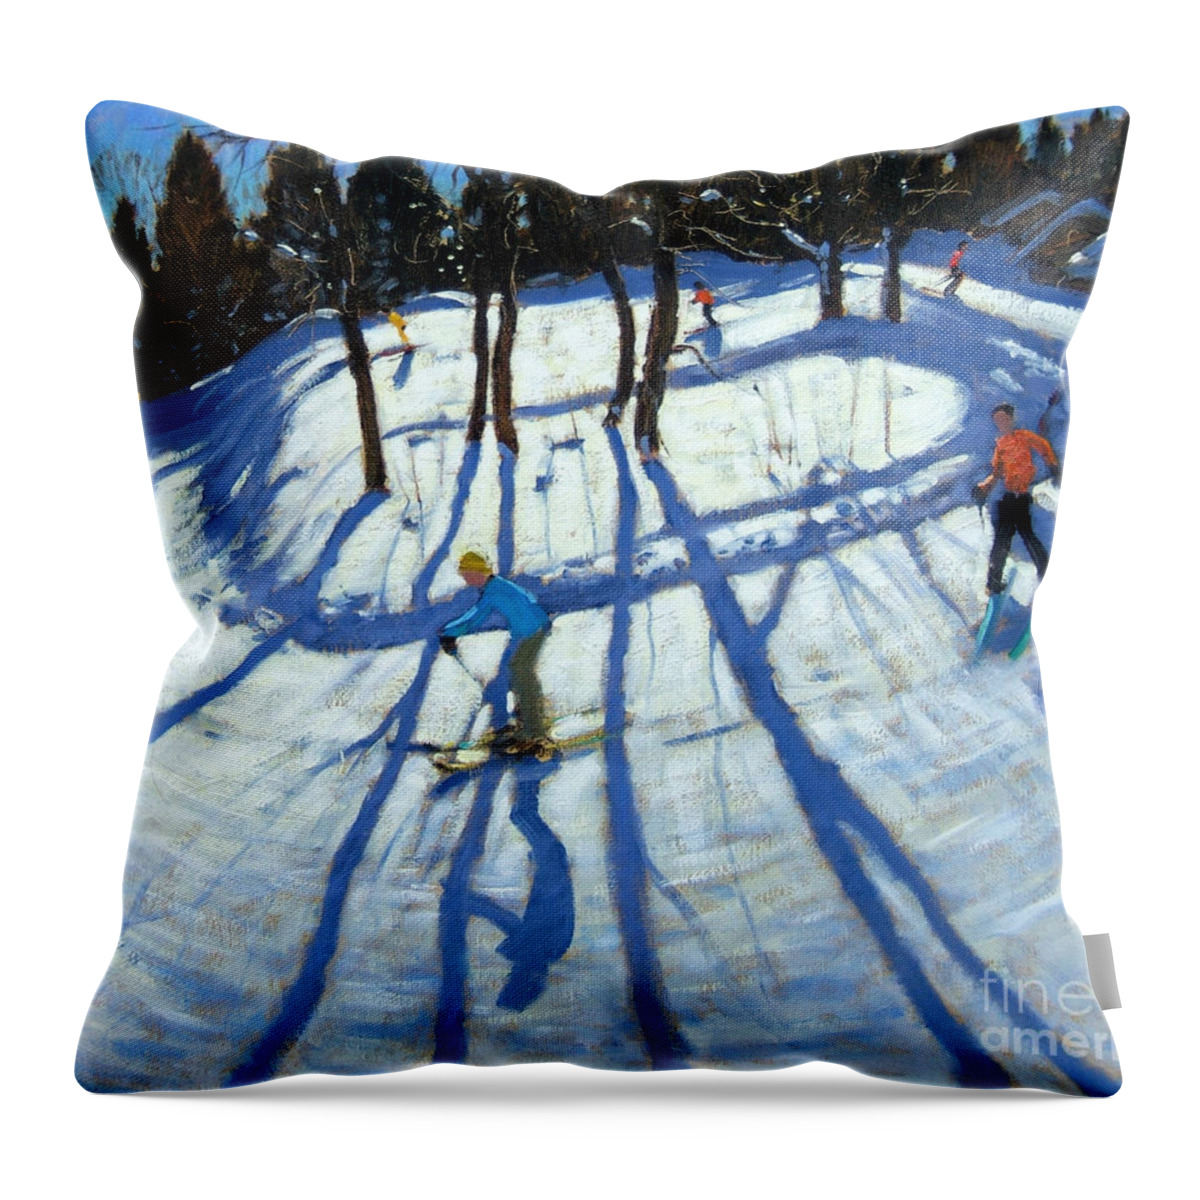 Piste Throw Pillow featuring the painting Winding Trail Morzine by Andrew Macara